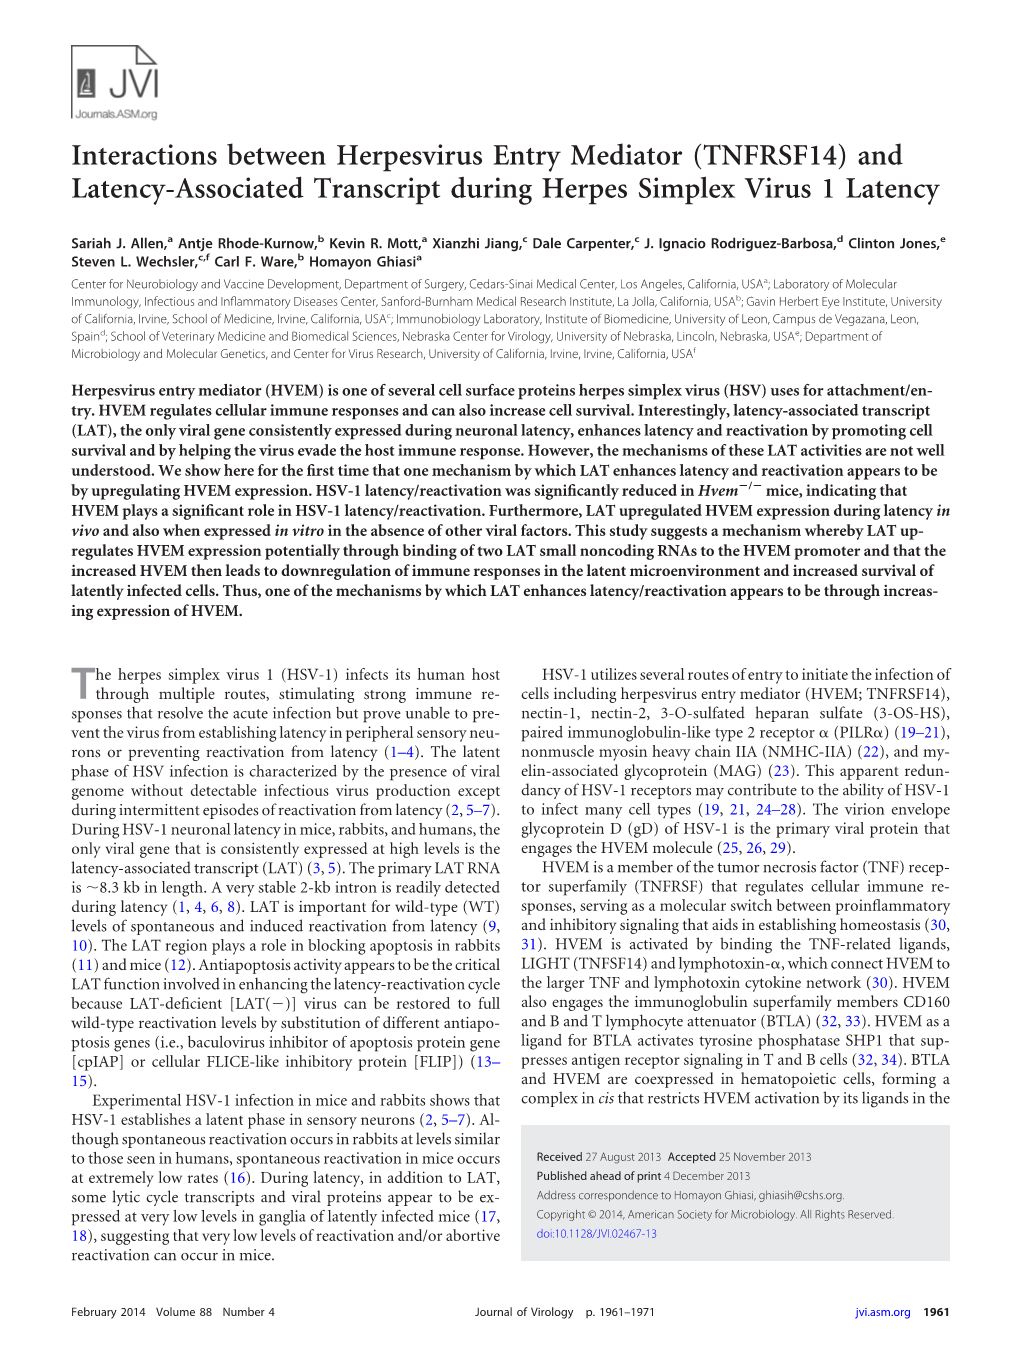 Interactions Between Herpesvirus Entry Mediator (TNFRSF14) and Latency-Associated Transcript During Herpes Simplex Virus 1 Latency